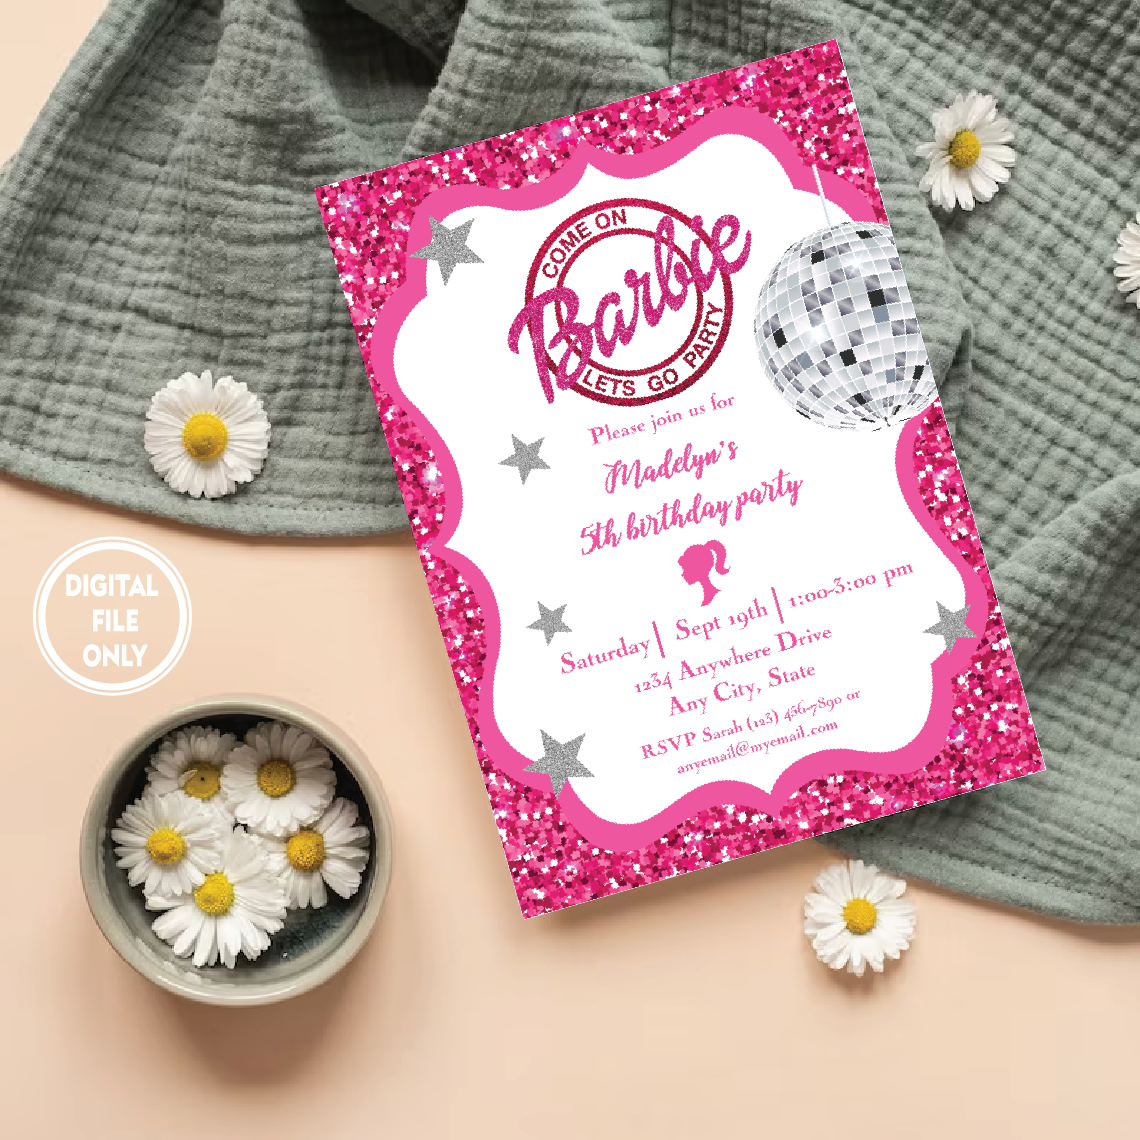 Personalized File Digital Girl's Birthday Party, Invitation for Girl Template Printable, Instant Download, Hot Pink Birthday Invite, Glitter Pink Invitation PNG File Only